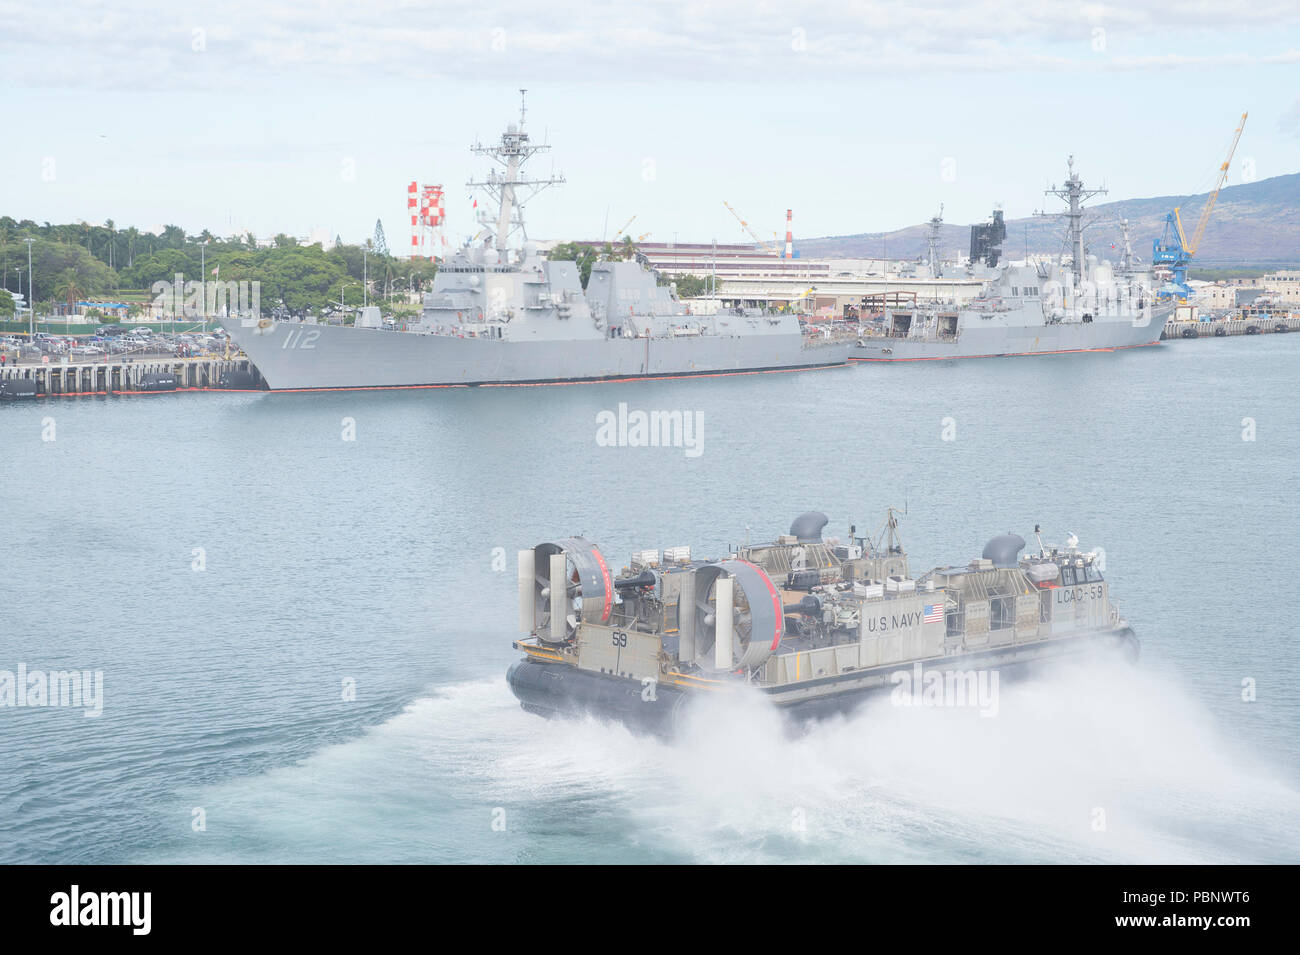 180726-N-RD713-1037 PEARL HARBOR, Hawaii (July 26, 2018) Landing craft air cushion (LCAC) 59, assigned to Assault Craft Unit (ACU) 5, departs the well deck of the amphibious assault ship USS Bonhomme Richard (LHD 6). Bonhomme Richard is currently underway in the U.S. 3rd Fleet area of operations. (U.S. Navy photo by Mass Communication Specialist 3rd Class Zachary DiPadova) Stock Photo